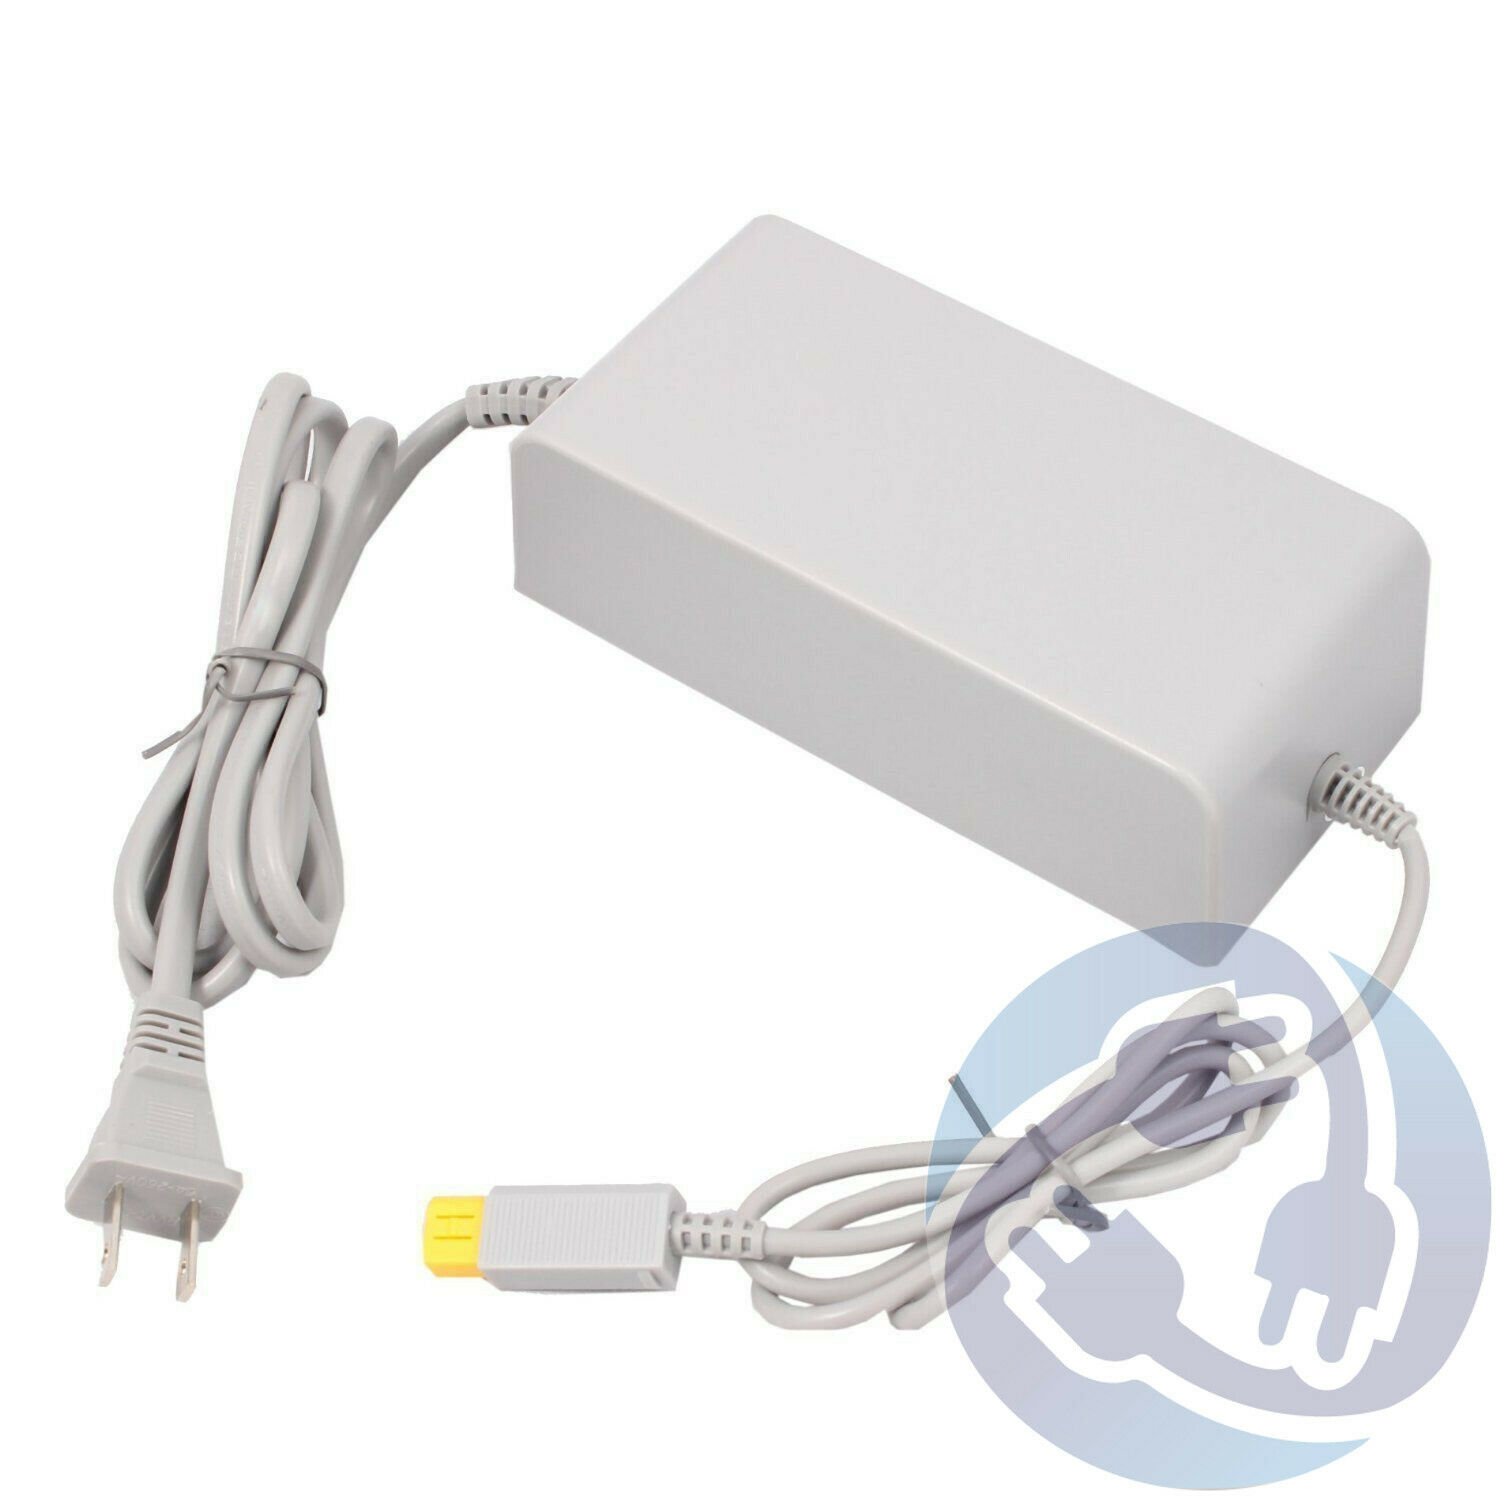 Replacement AC Wall Adapter Power Supply Charger Plug For Nintendo Wii U Console